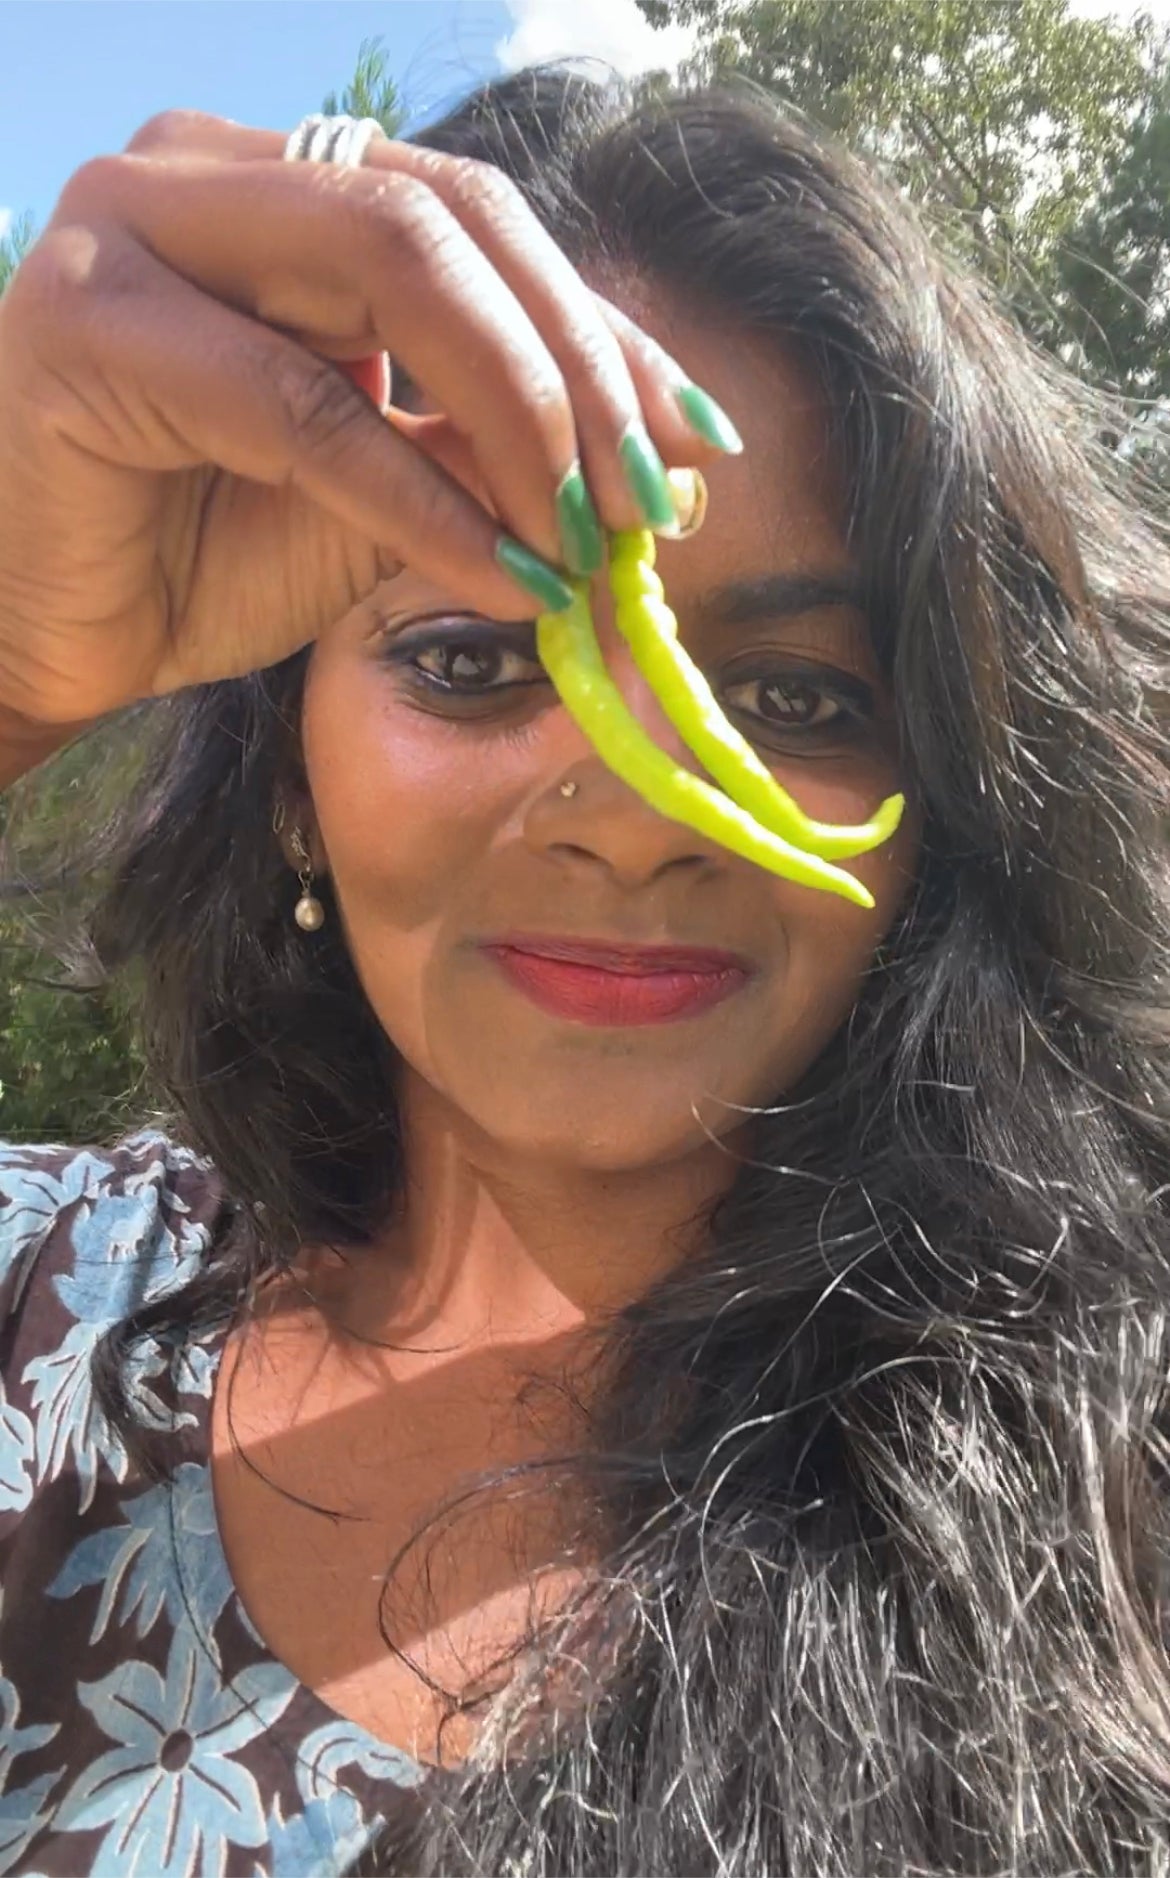 south indian woman with freshly harvested green chillies